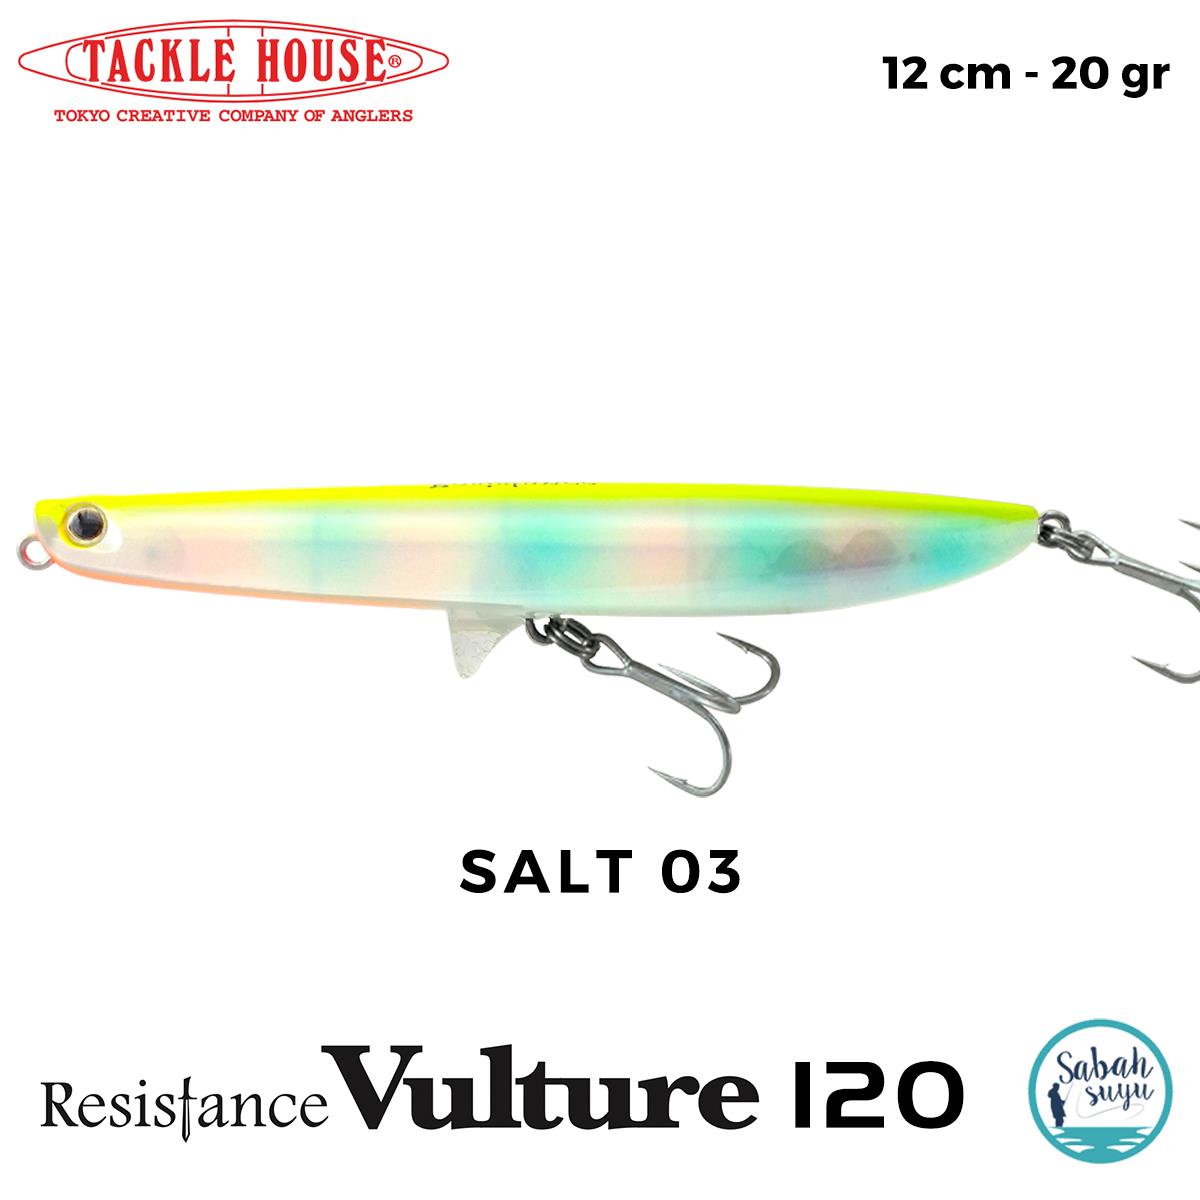 Tackle House Vulture 120 12cm 20g